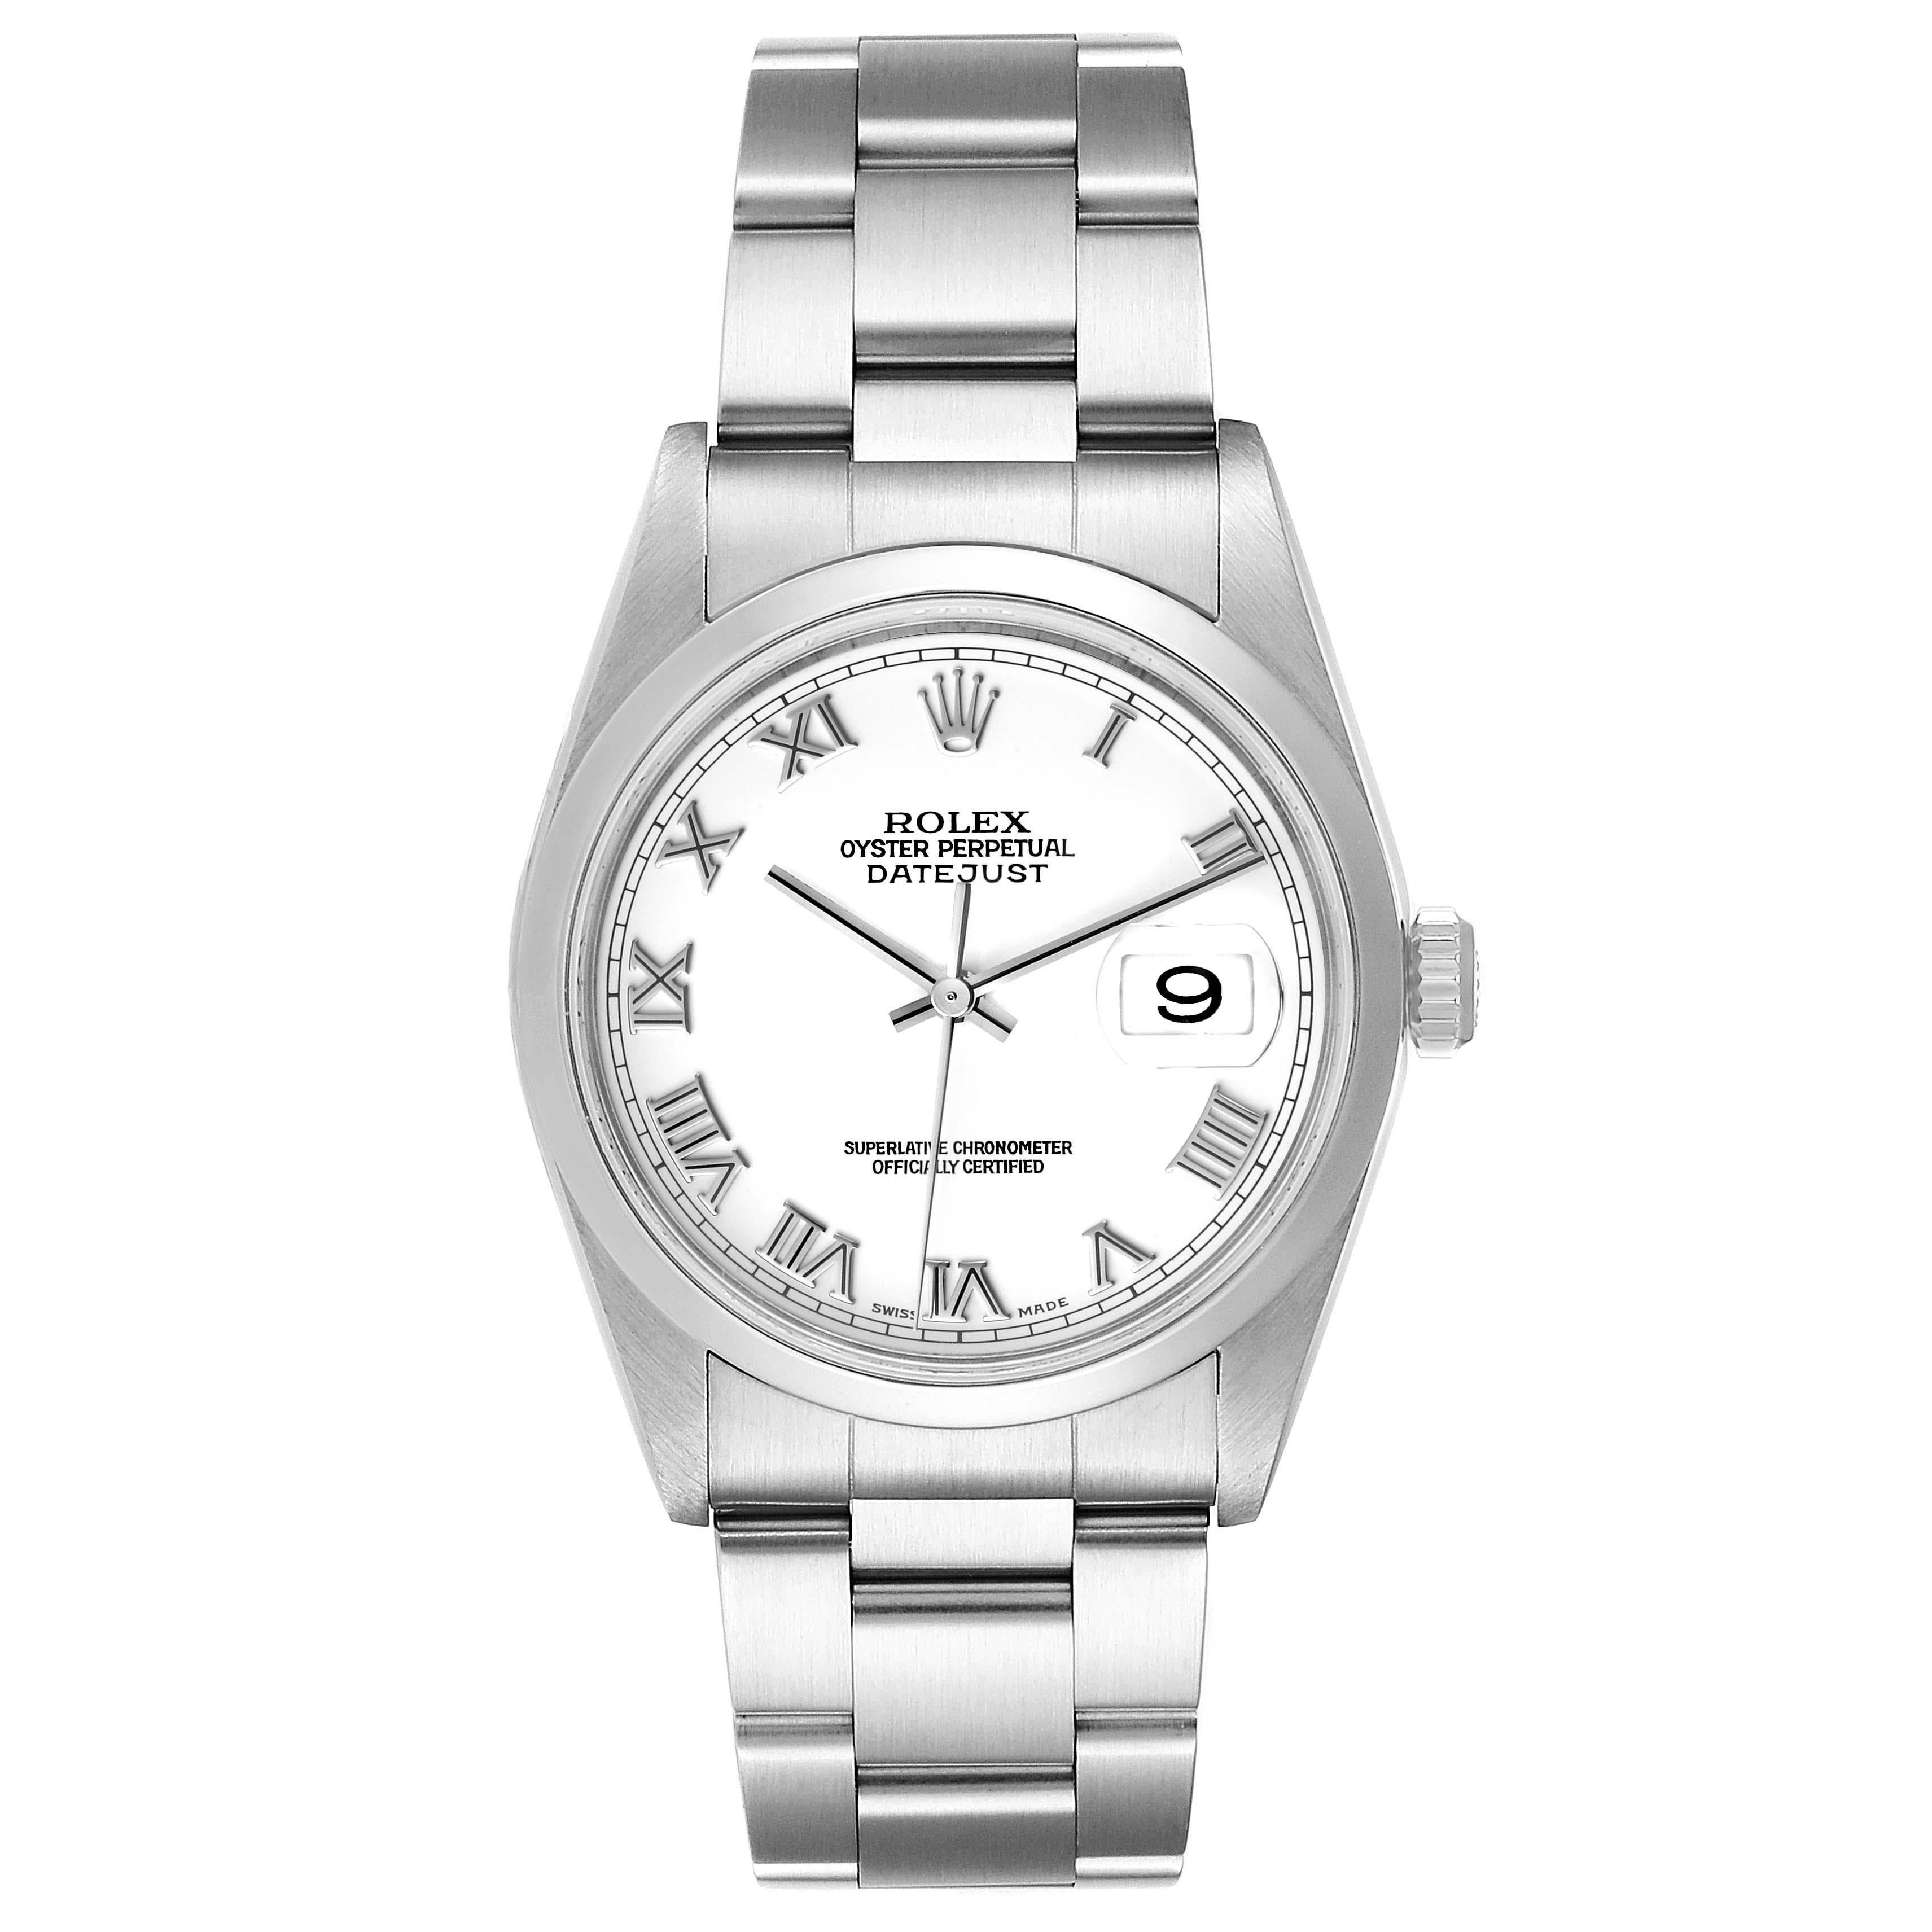 Rolex Datejust White Roman Dial Oyster Bracelet Steel Mens Watch 16200. Officially certified chronometer automatic self-winding movement. Stainless steel oyster case 36 mm in diameter. Rolex logo on a crown. Stainless steel smooth domed bezel.